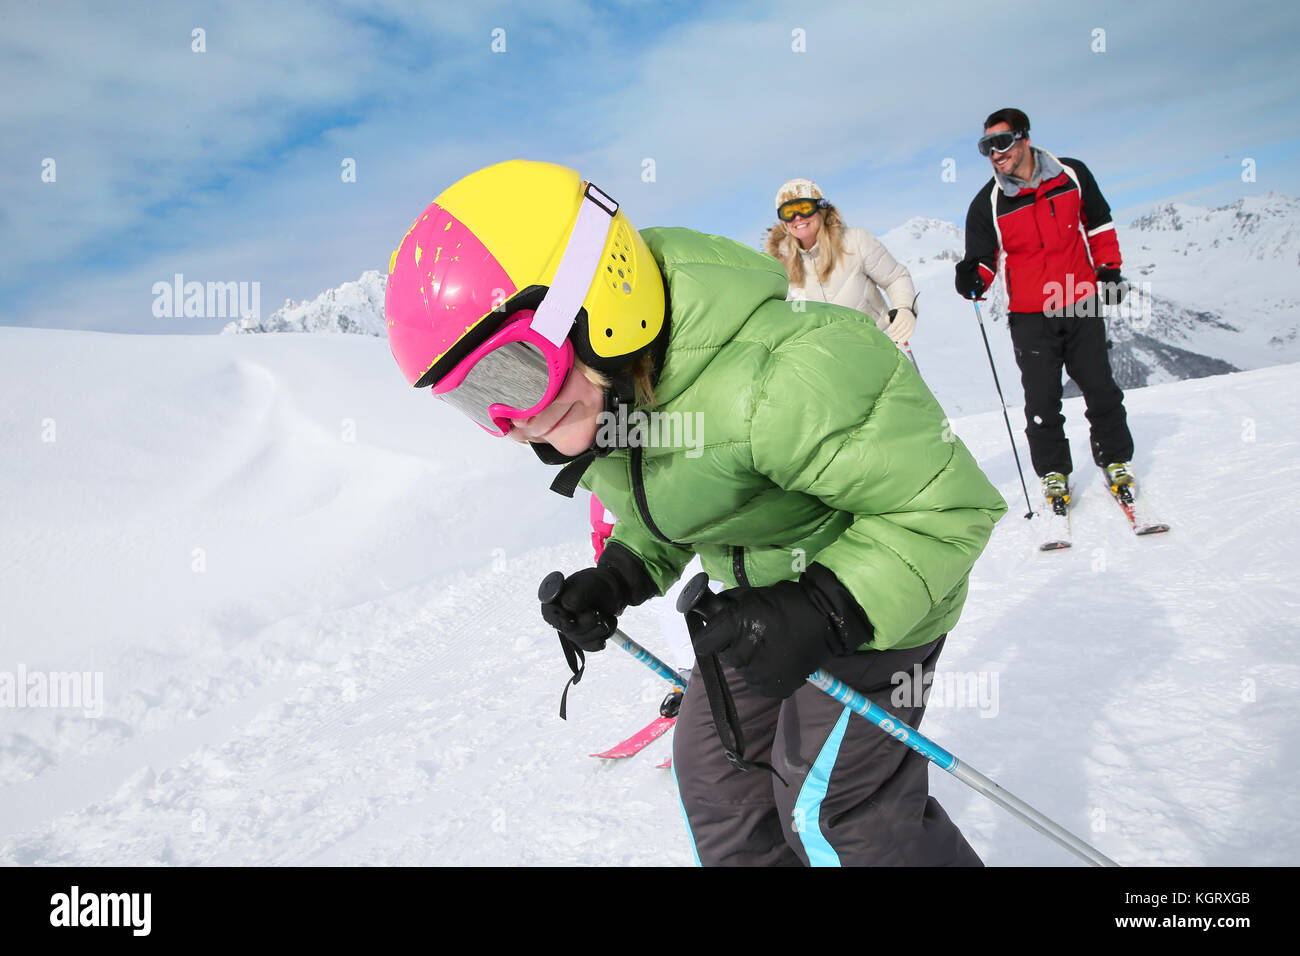 6-year-old boy skiing down ski slope with family Stock Photo